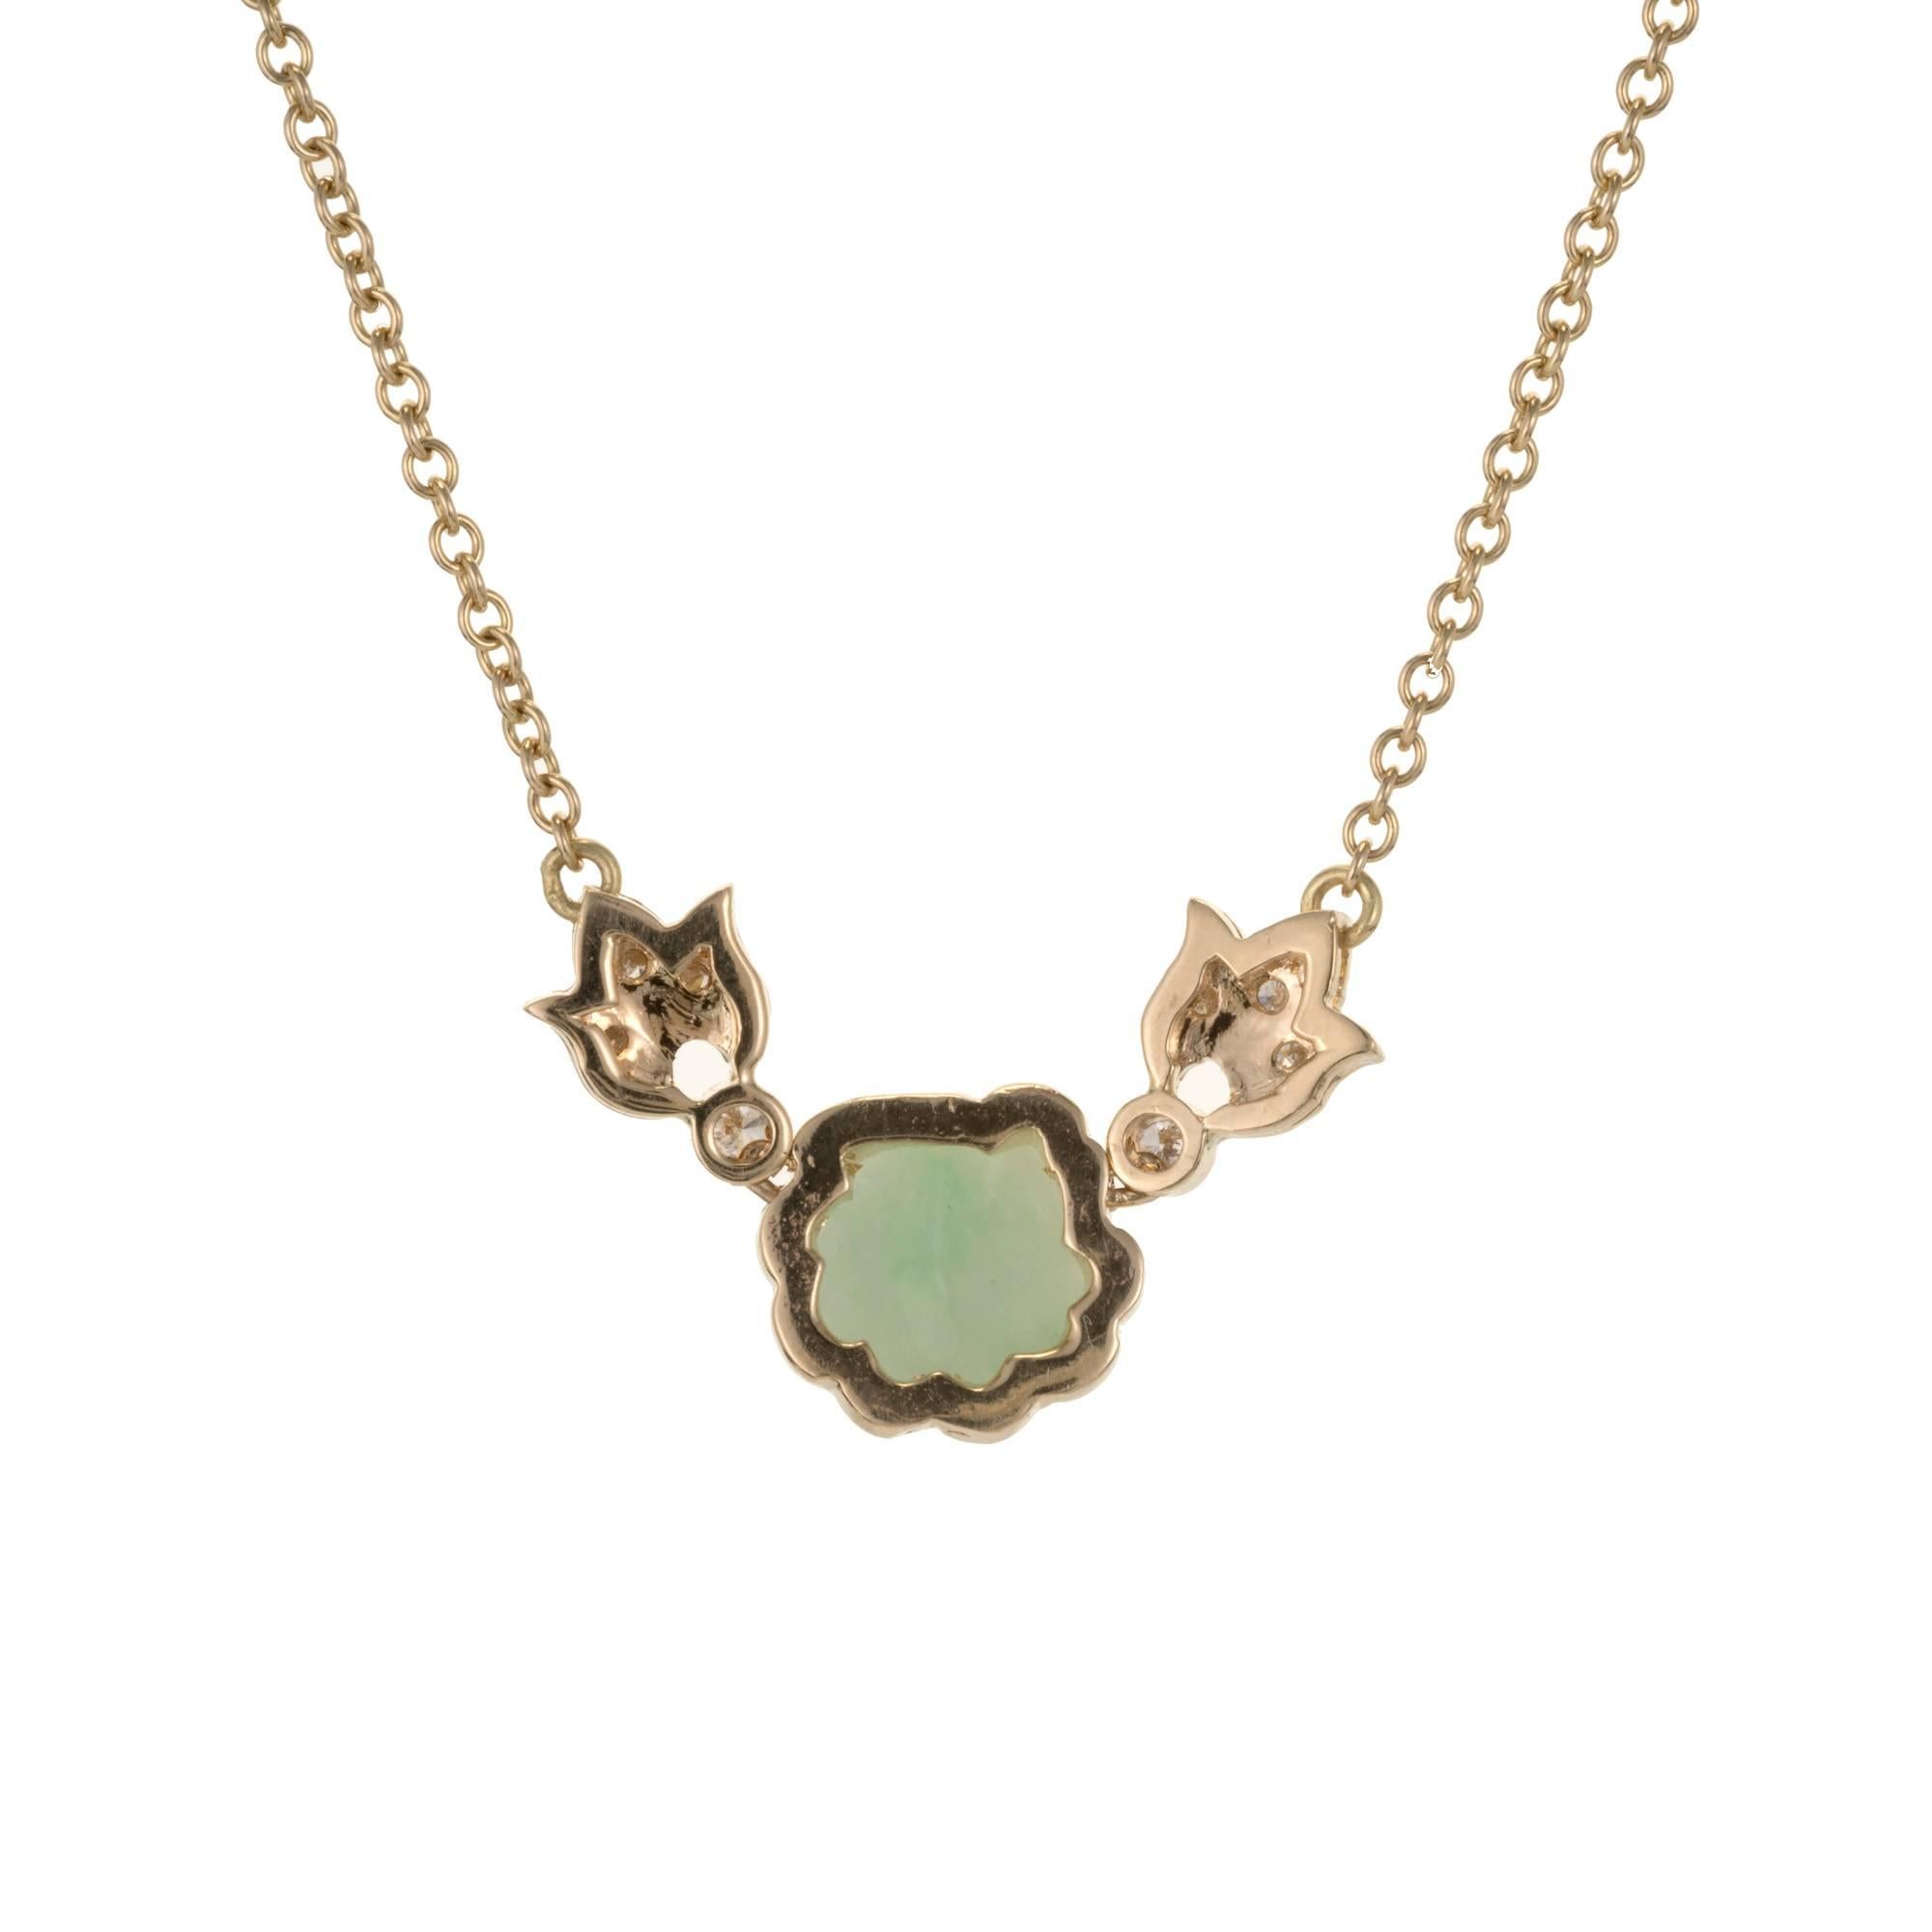 GIA certified Natural untreated Jadeite Jade translucent flower necklace with sparkly full cut Diamond accents on a 14k yellow gold cable chain with a lobster catch.

1 carved light green translucent Jadeite Jade, 9.84 x 9.62 x 2.92mm, GIA